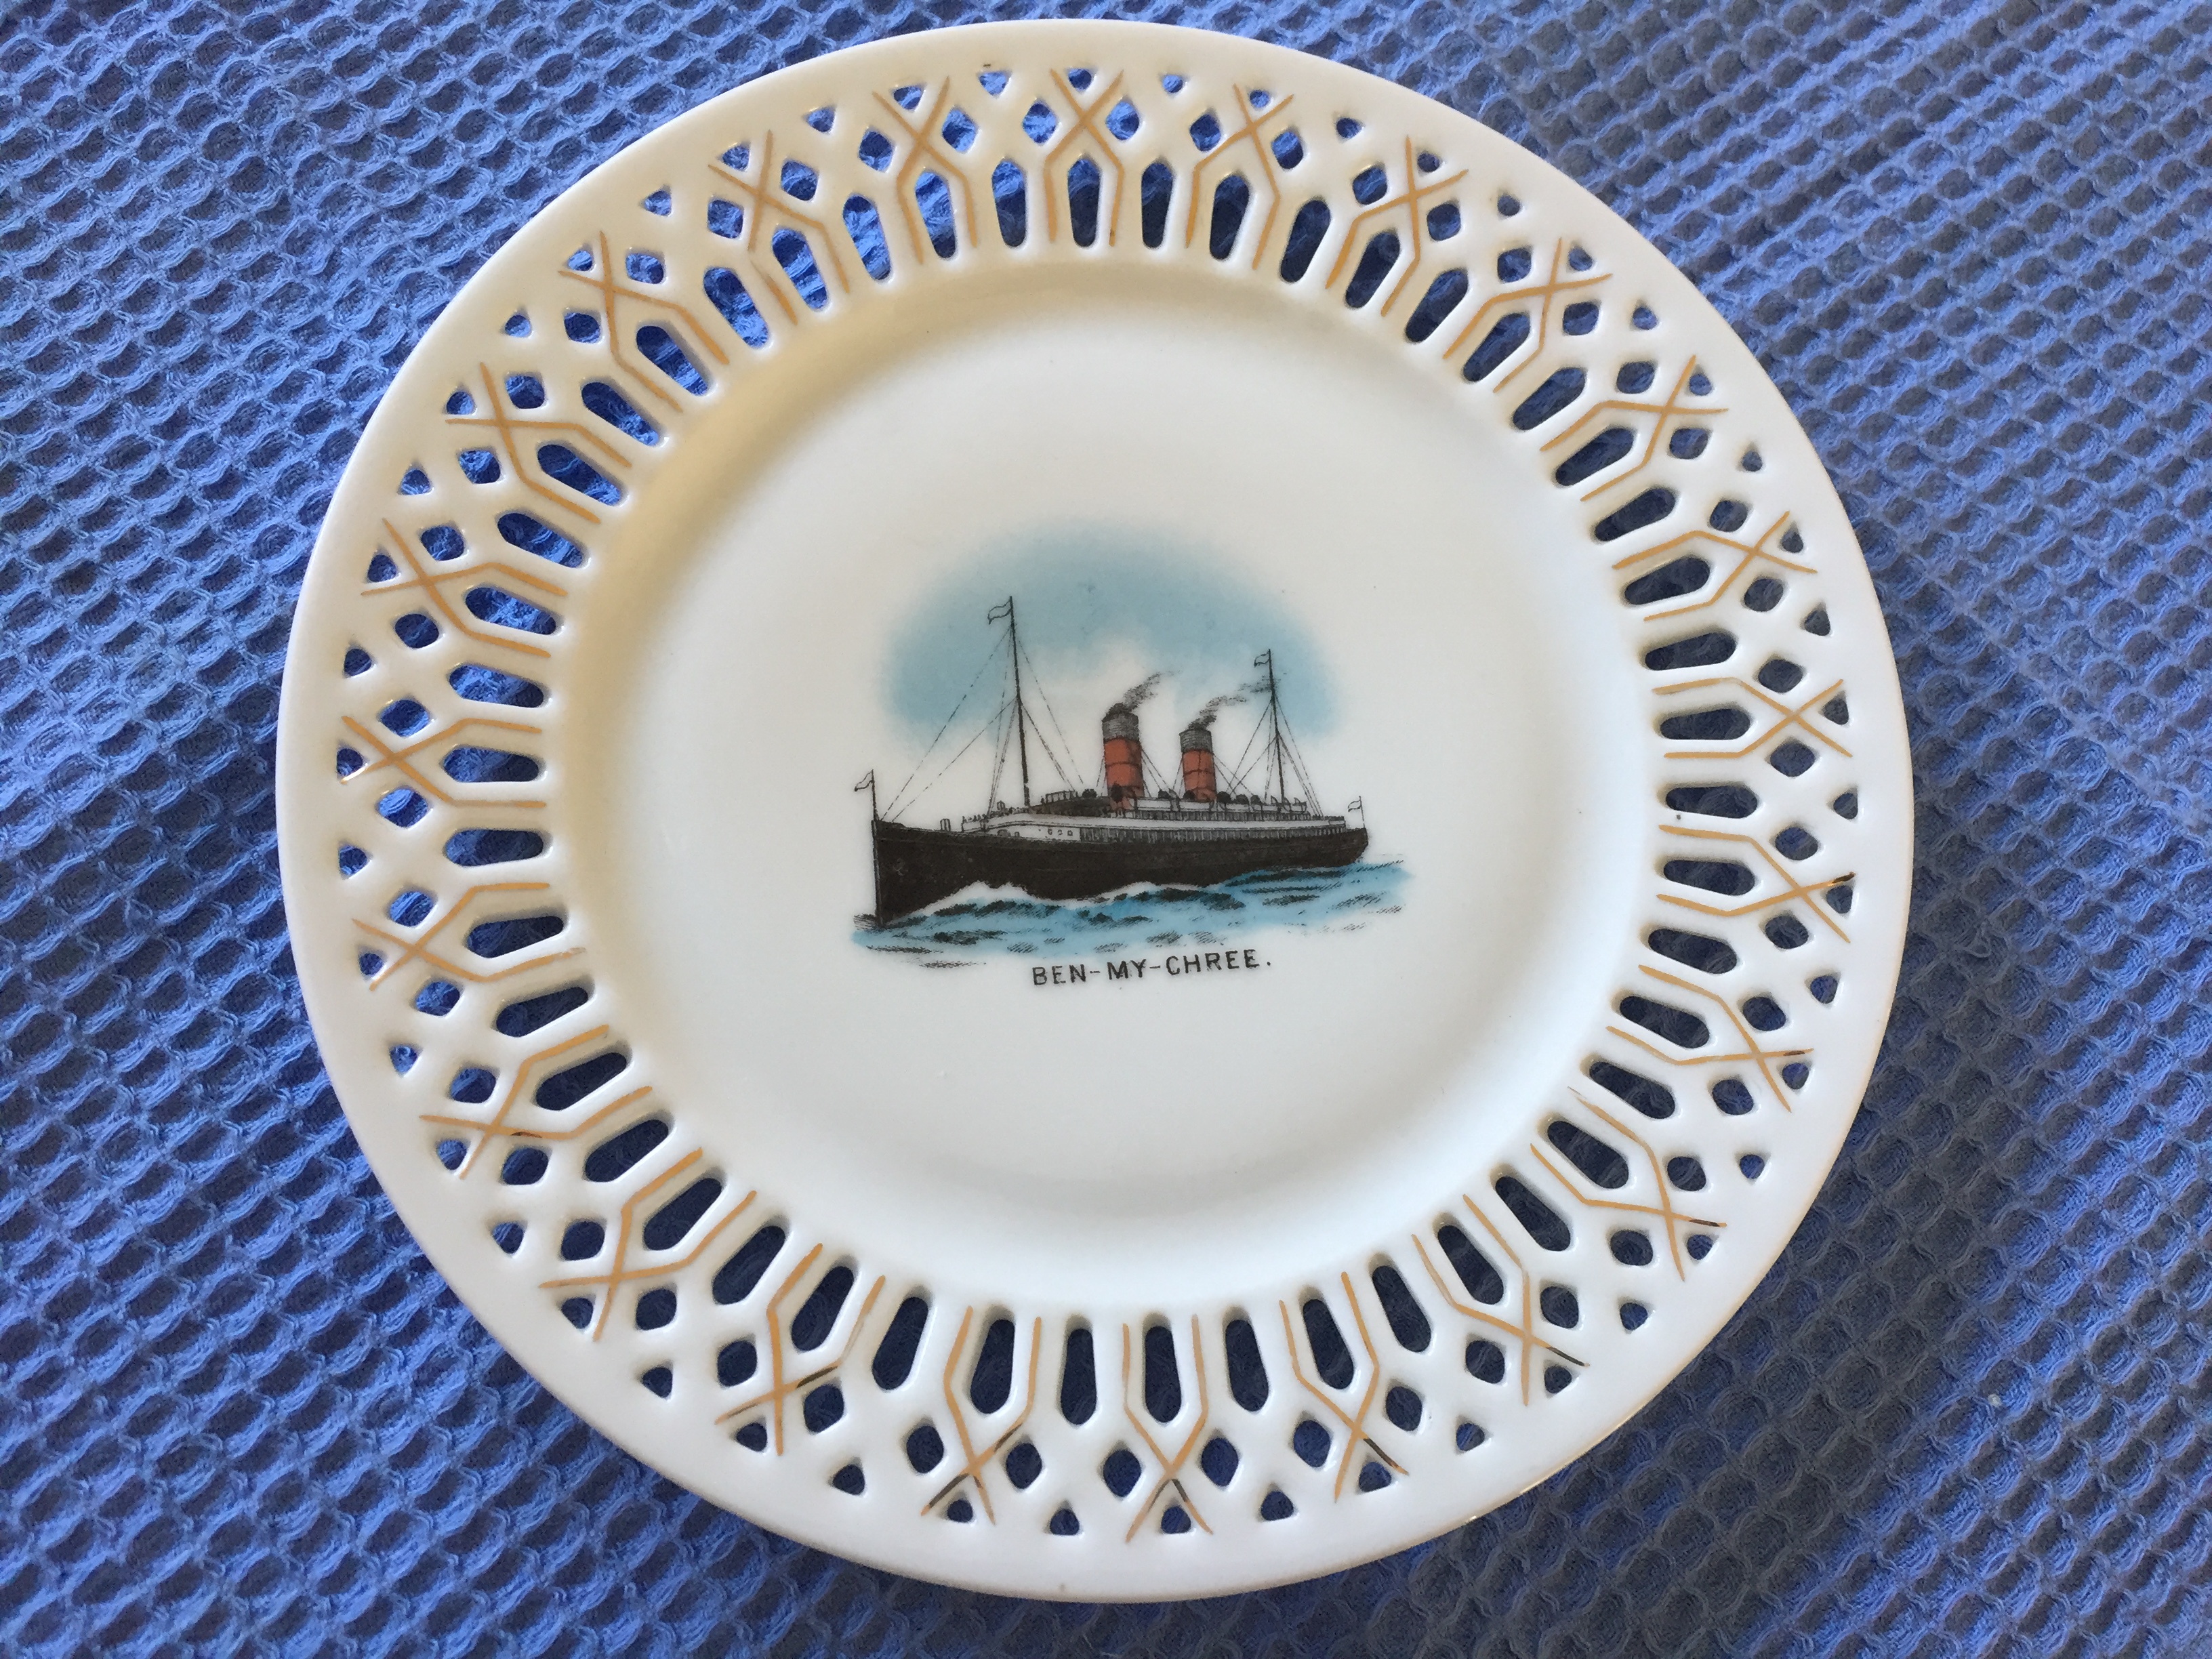 SOUVENIR PLATE FROM THE FERRY VESSEL THE BEN MY CHREE